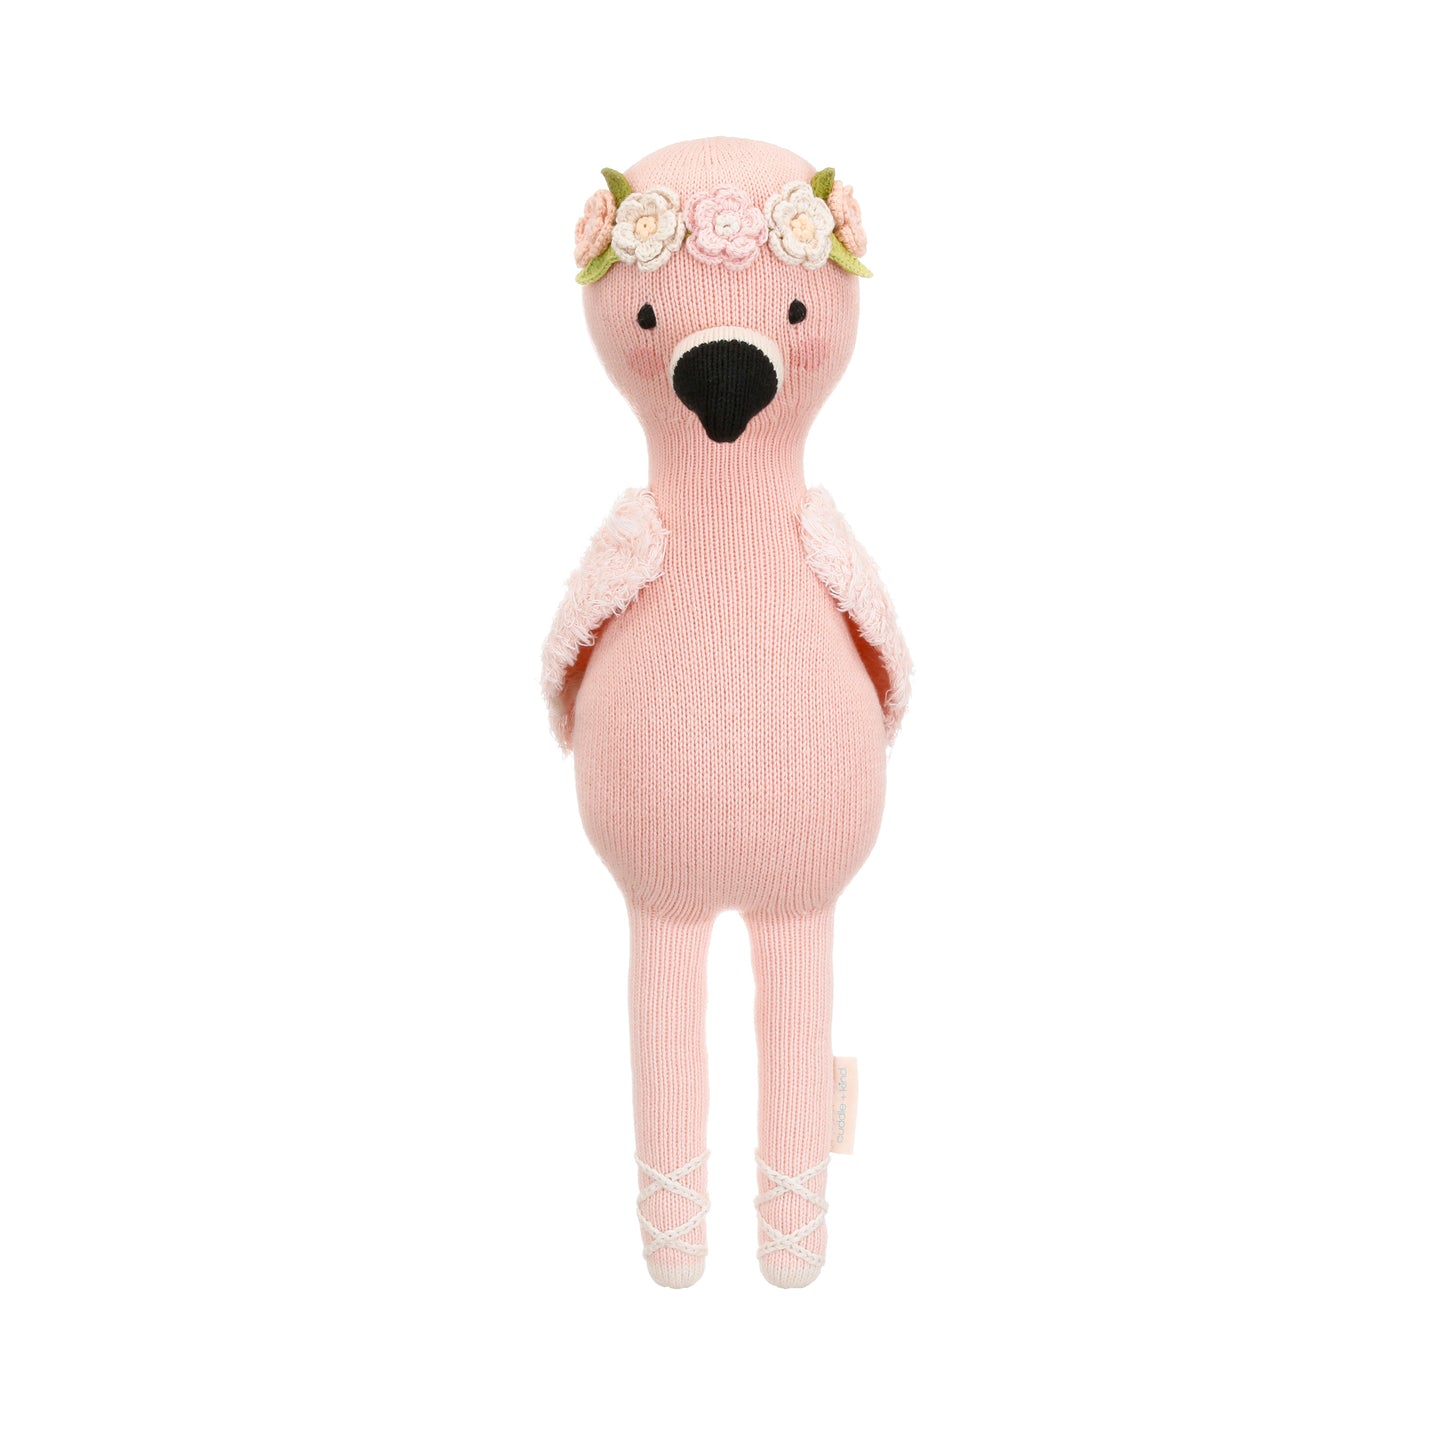 Penelope the flamingo shown from 360°. Penelope has a flower crown, fluffy wings and ballet slippers.